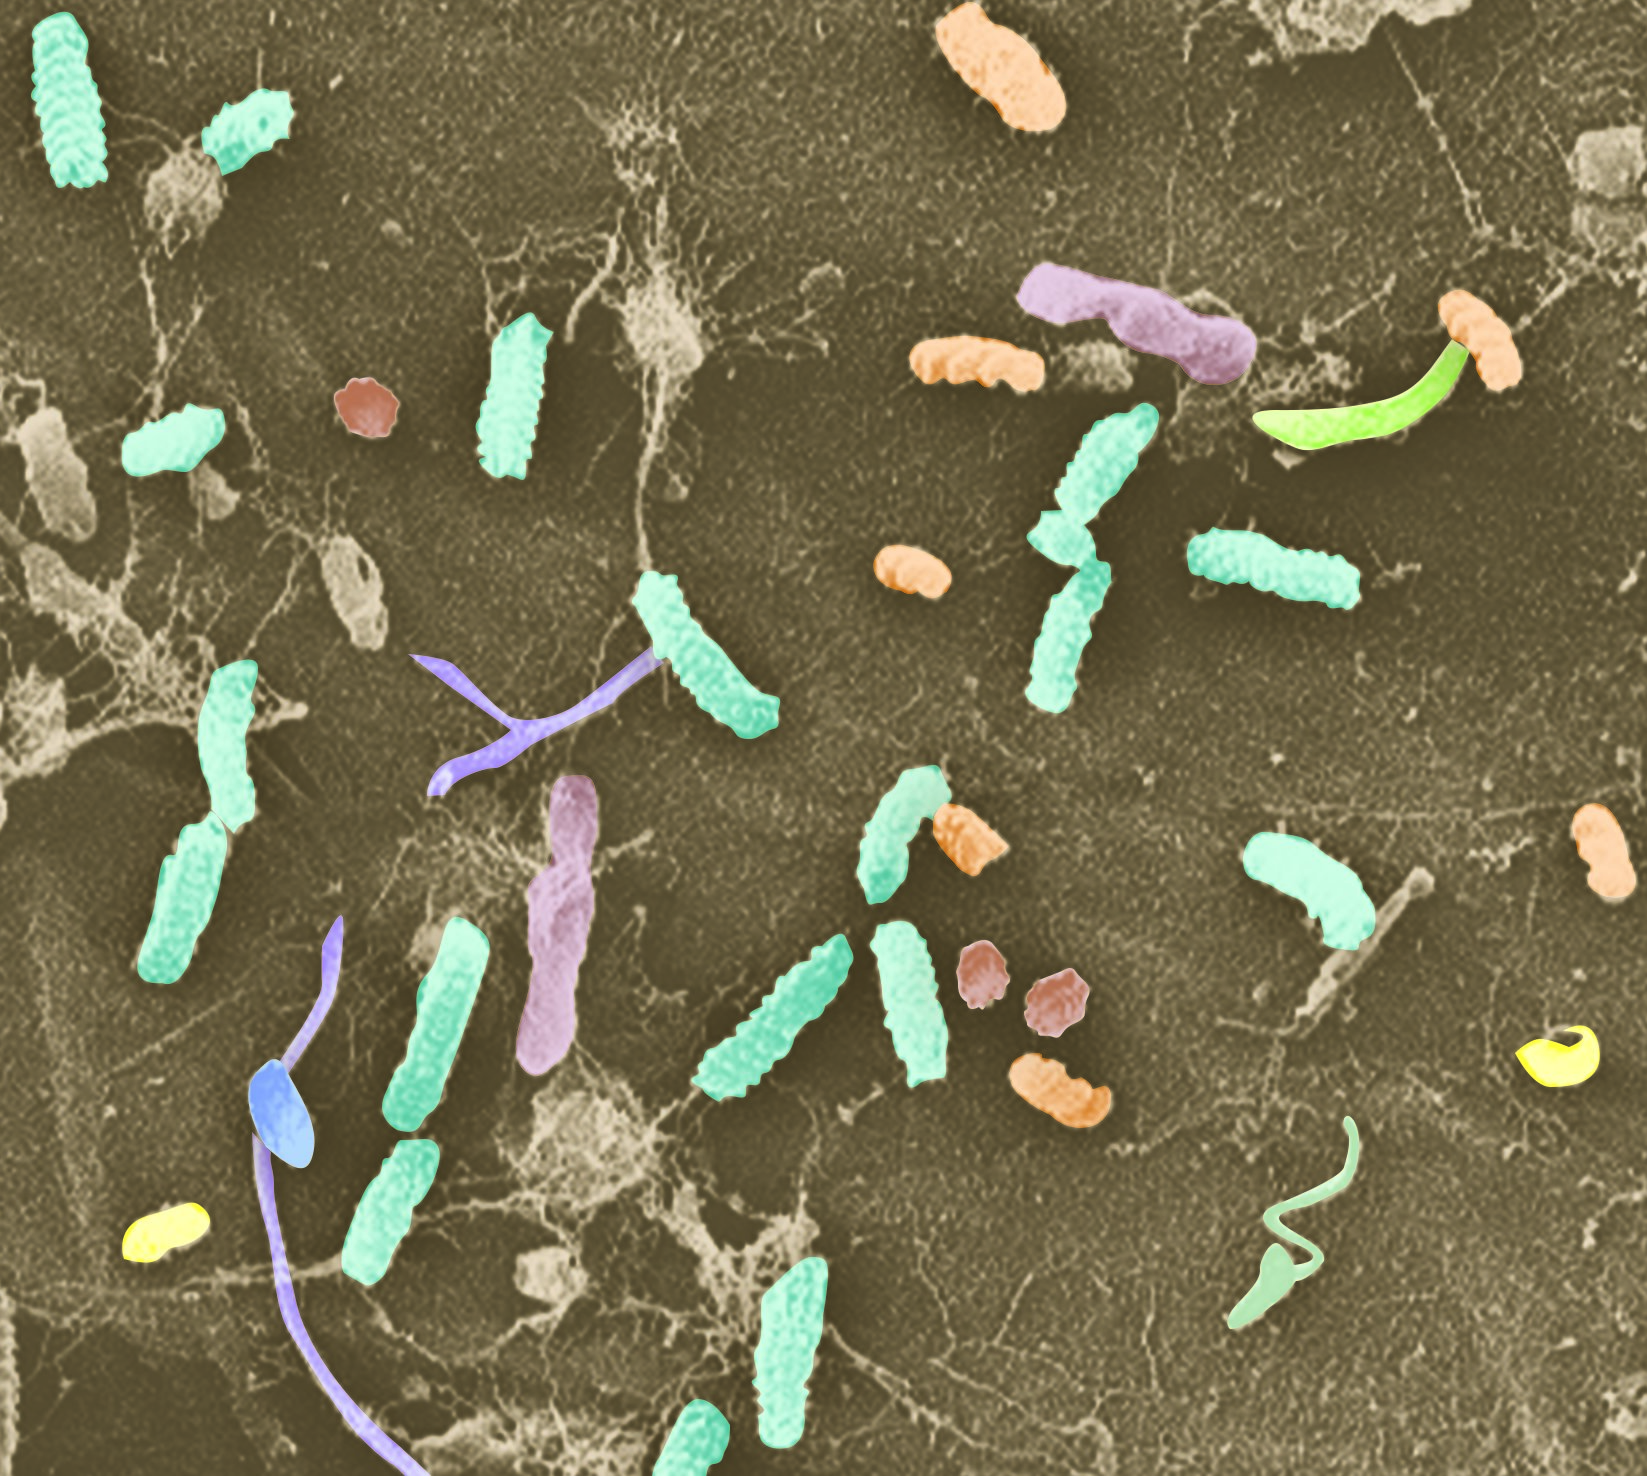 on their resident bacteria to protect them from harmful microbes